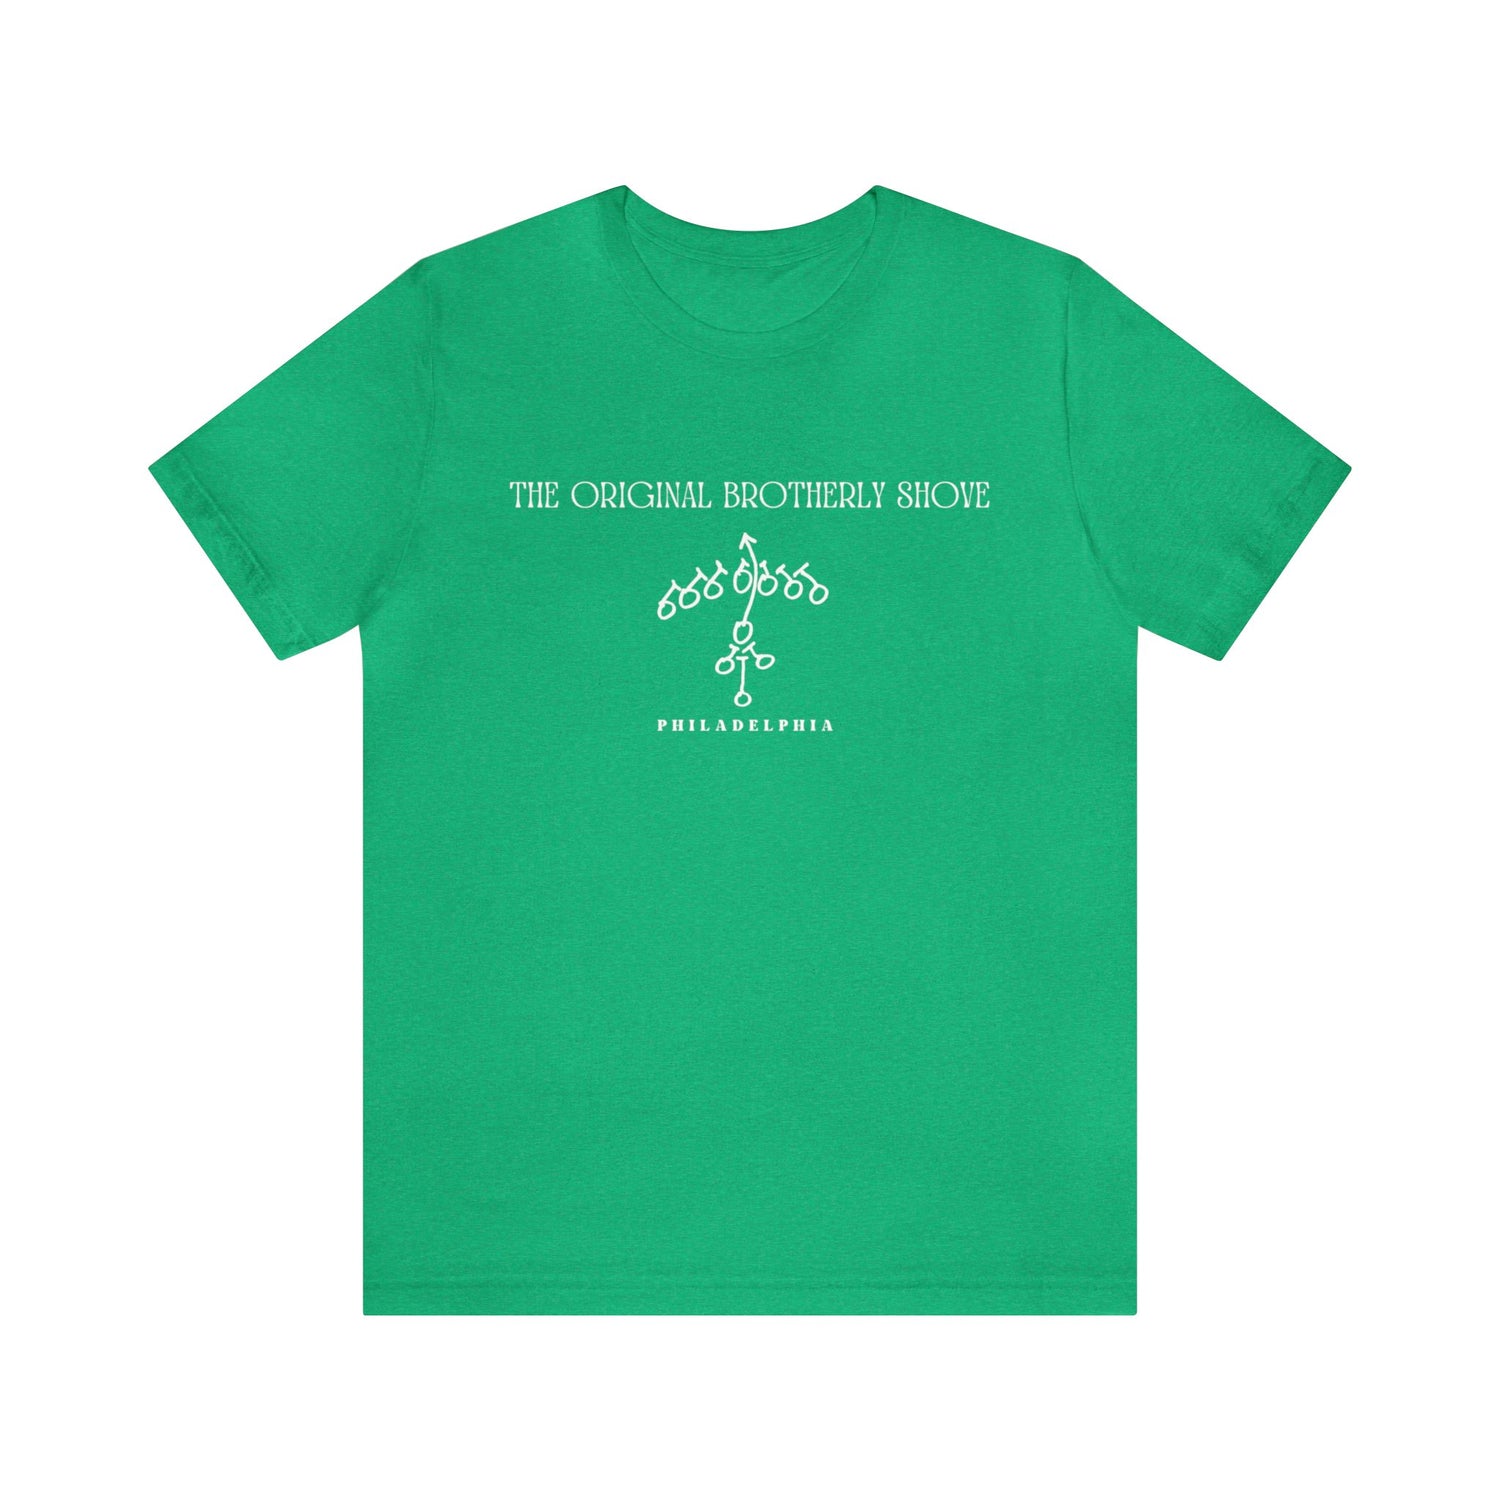 Kelly Green "The Original Brotherly Shove" T-shirt - Home Field Fan